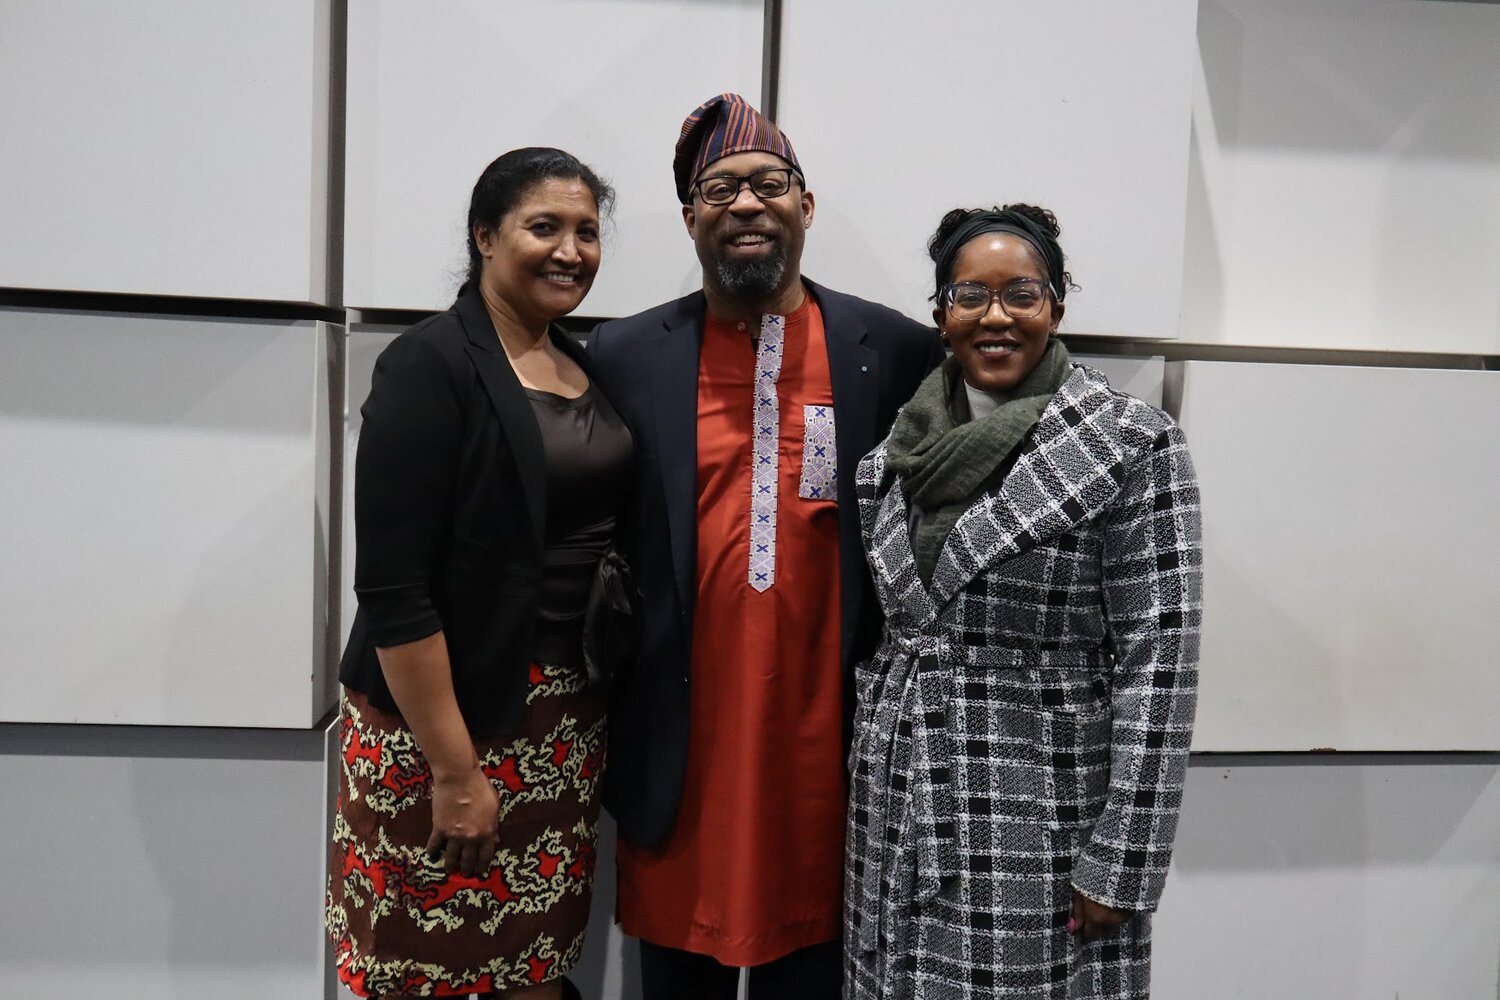 Dr. Jarvis M. Watson with chairwoman Dr. Corrinne Graham (left) and his wife, Adesuwa
Watson.